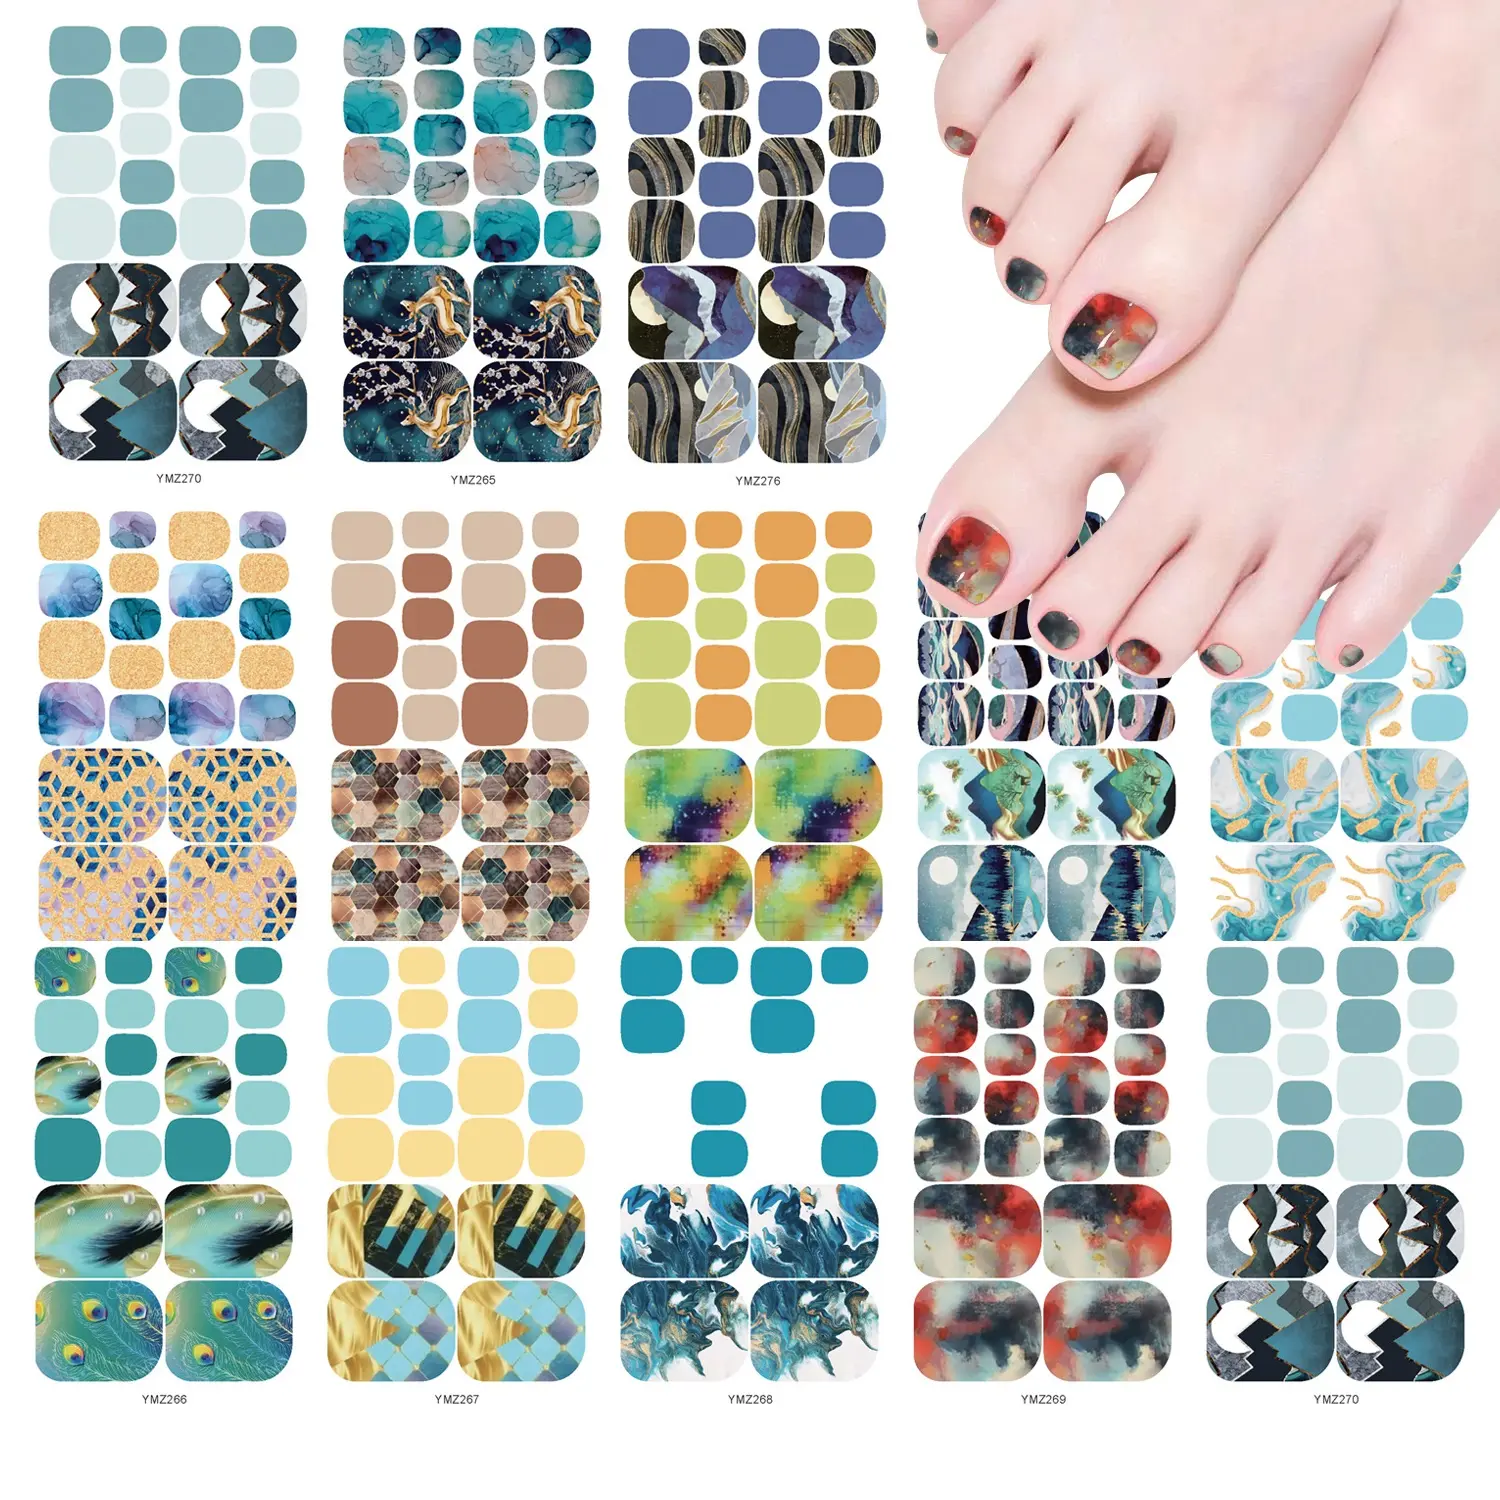 New Design Waterproof Full Cover Toe Nail Stickers Marbling Nail Stickers For Girls Diy Salon Manicure